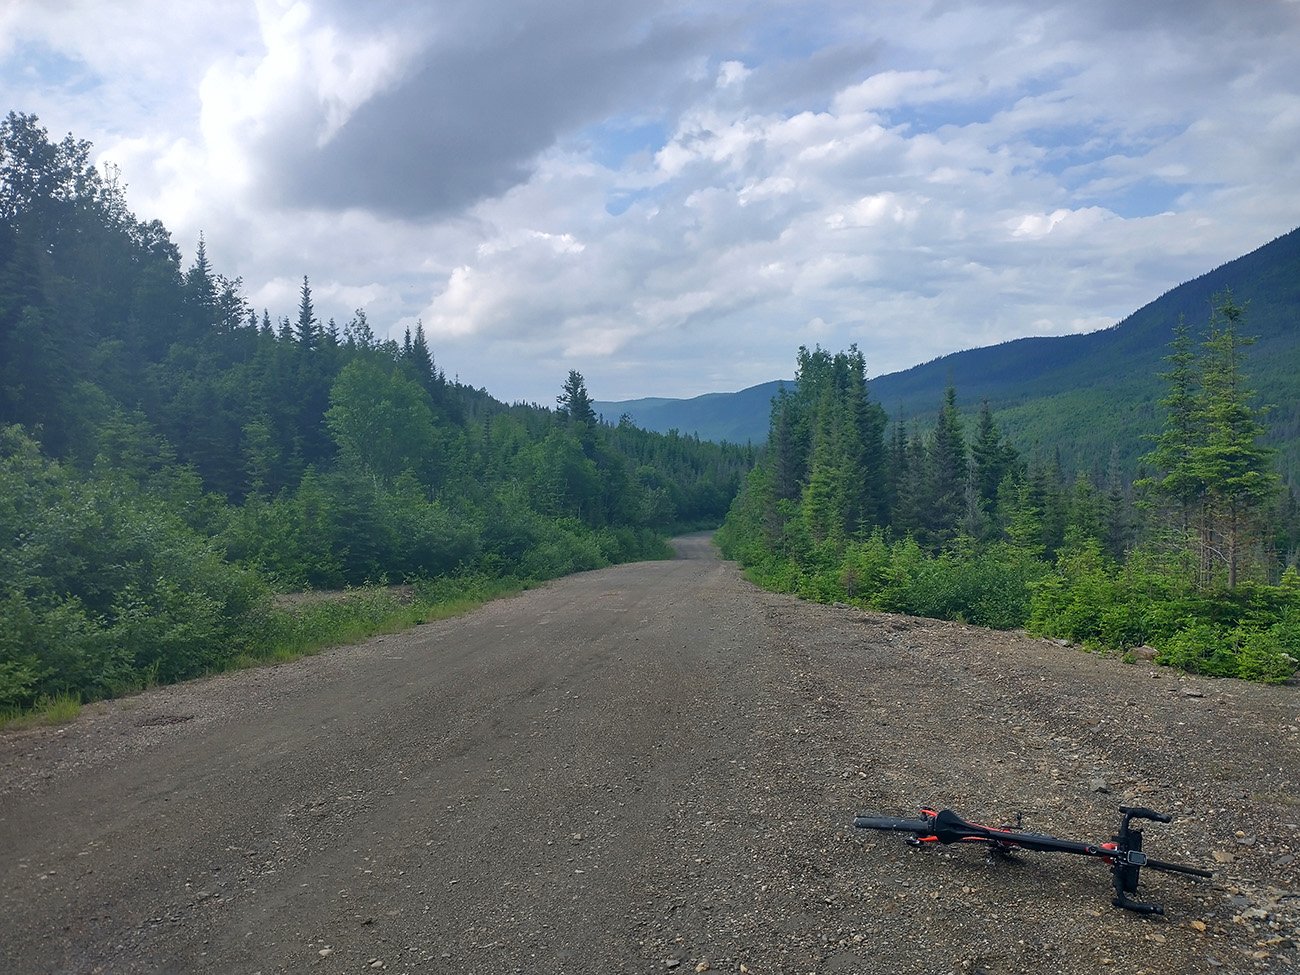 One of those "Am I getting eaten by a bear?" areas. Just secluded dirt road for 50km...